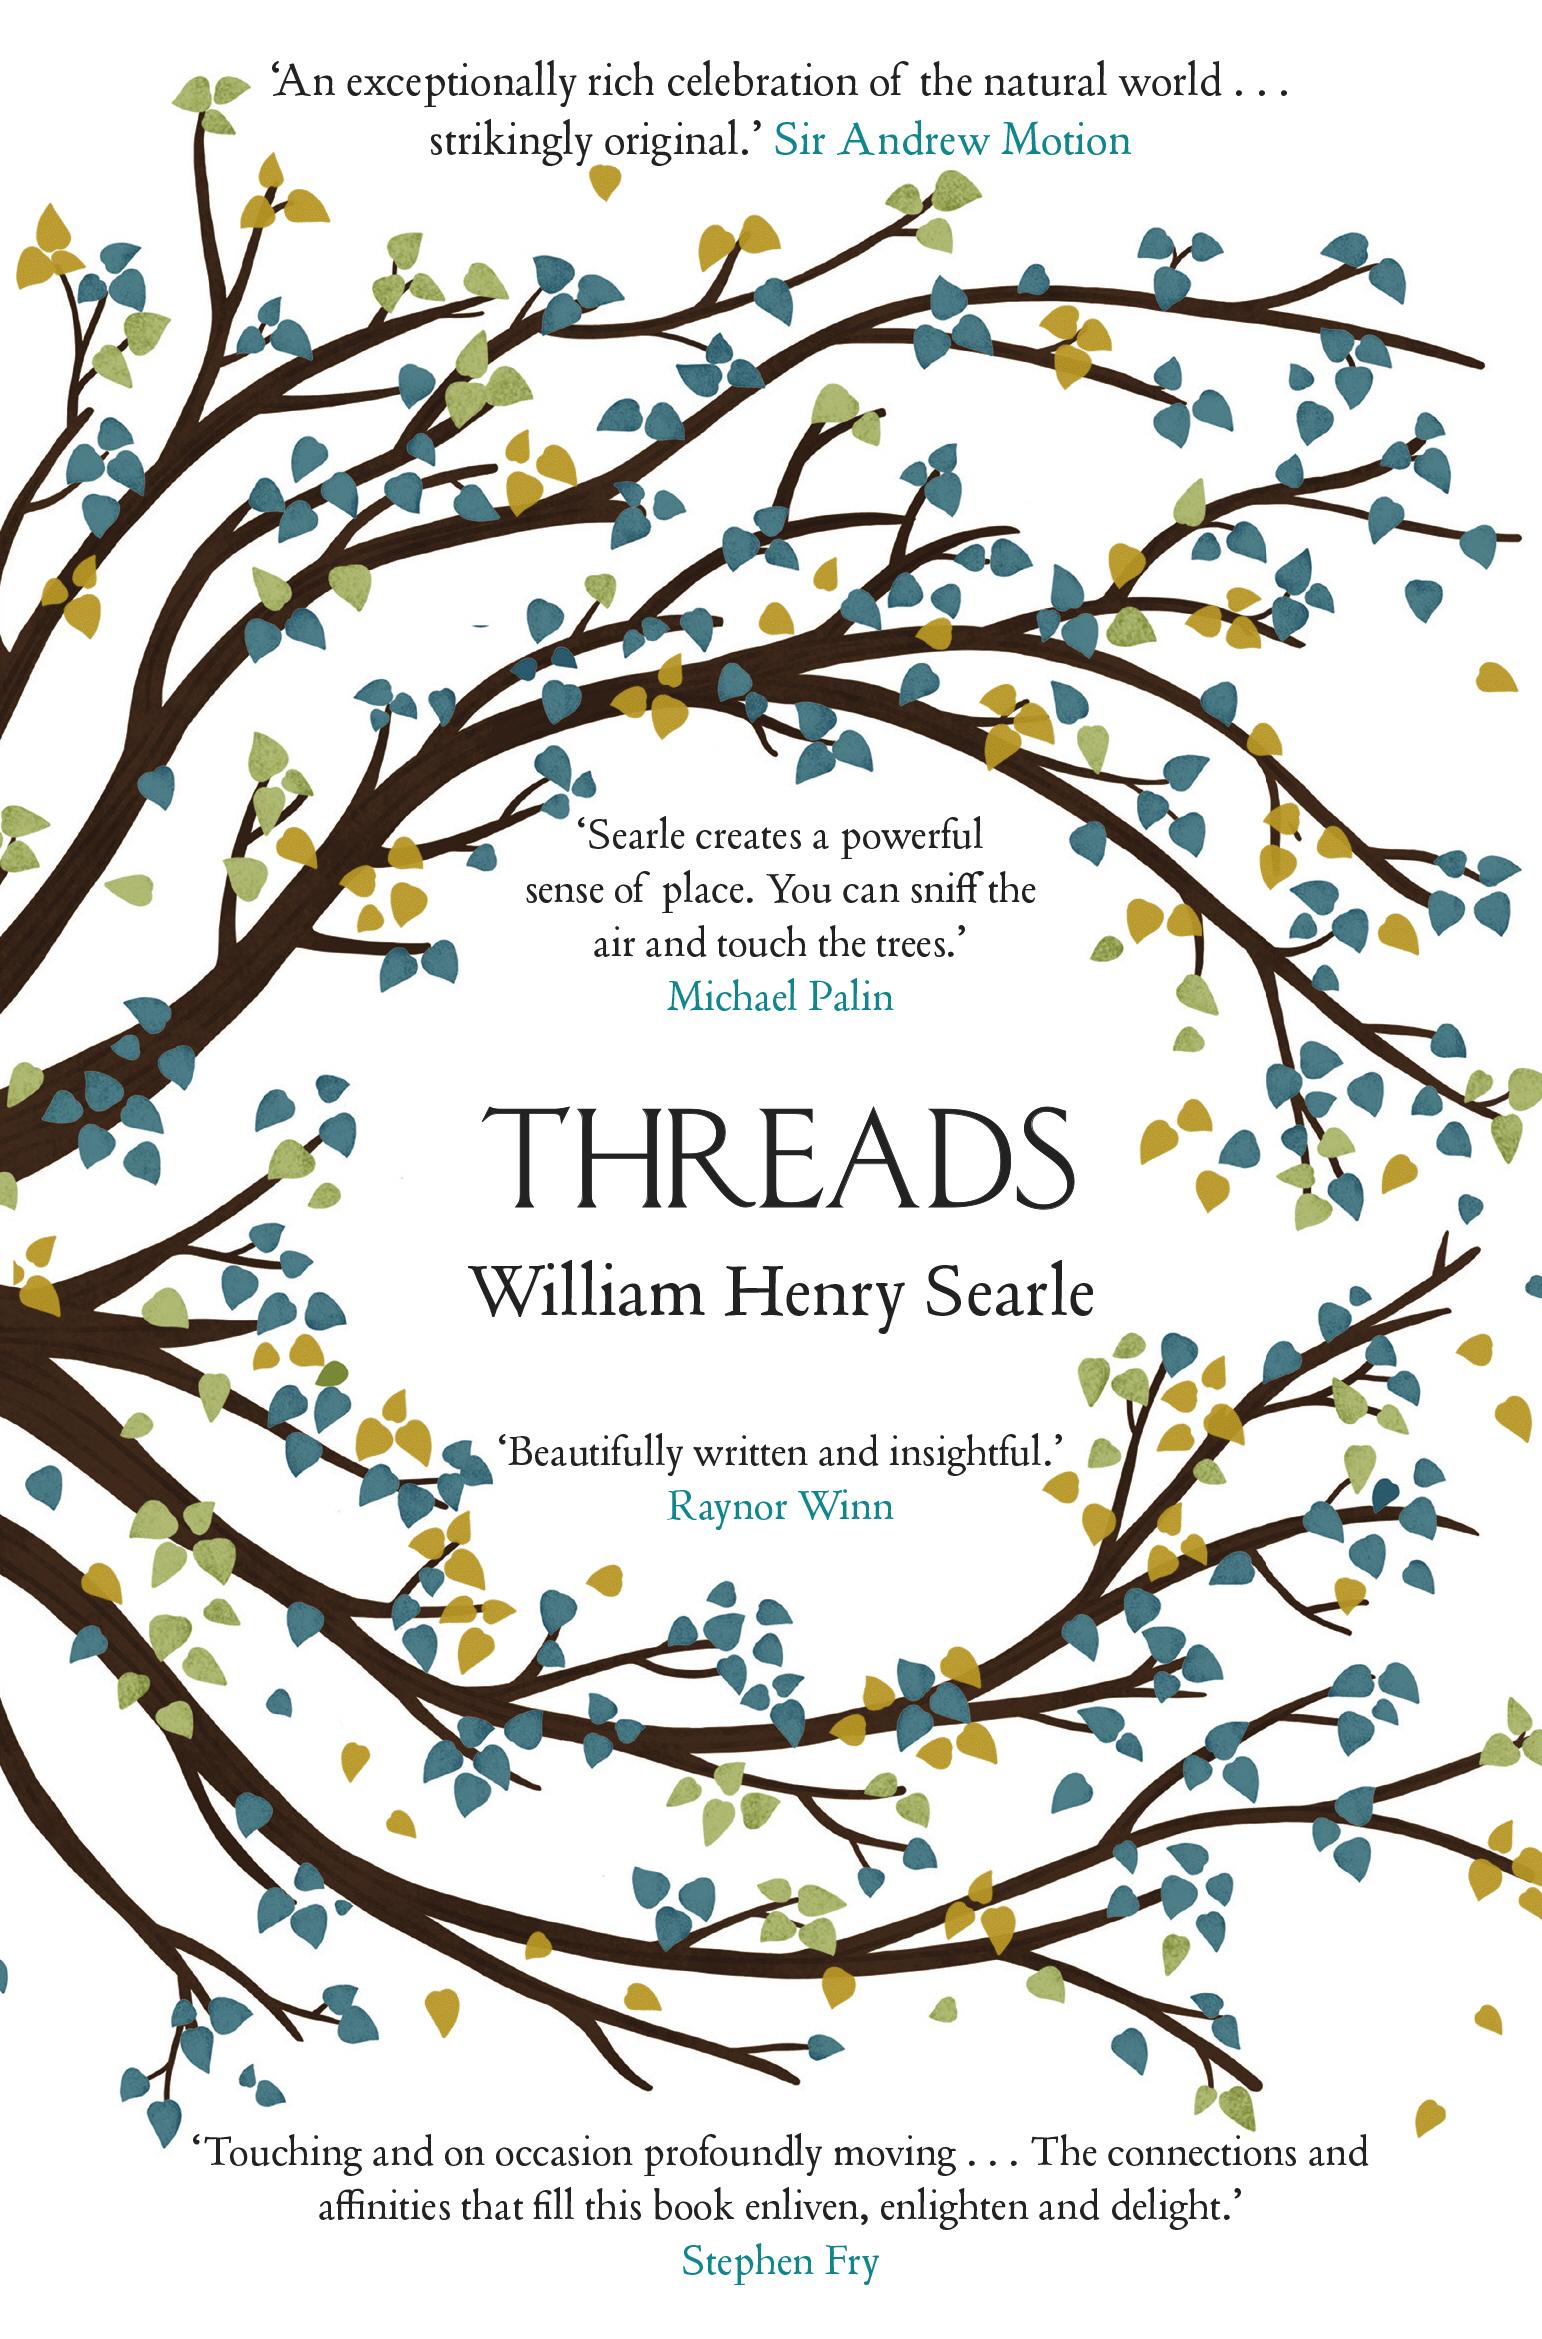 Threads - William Henry Searle